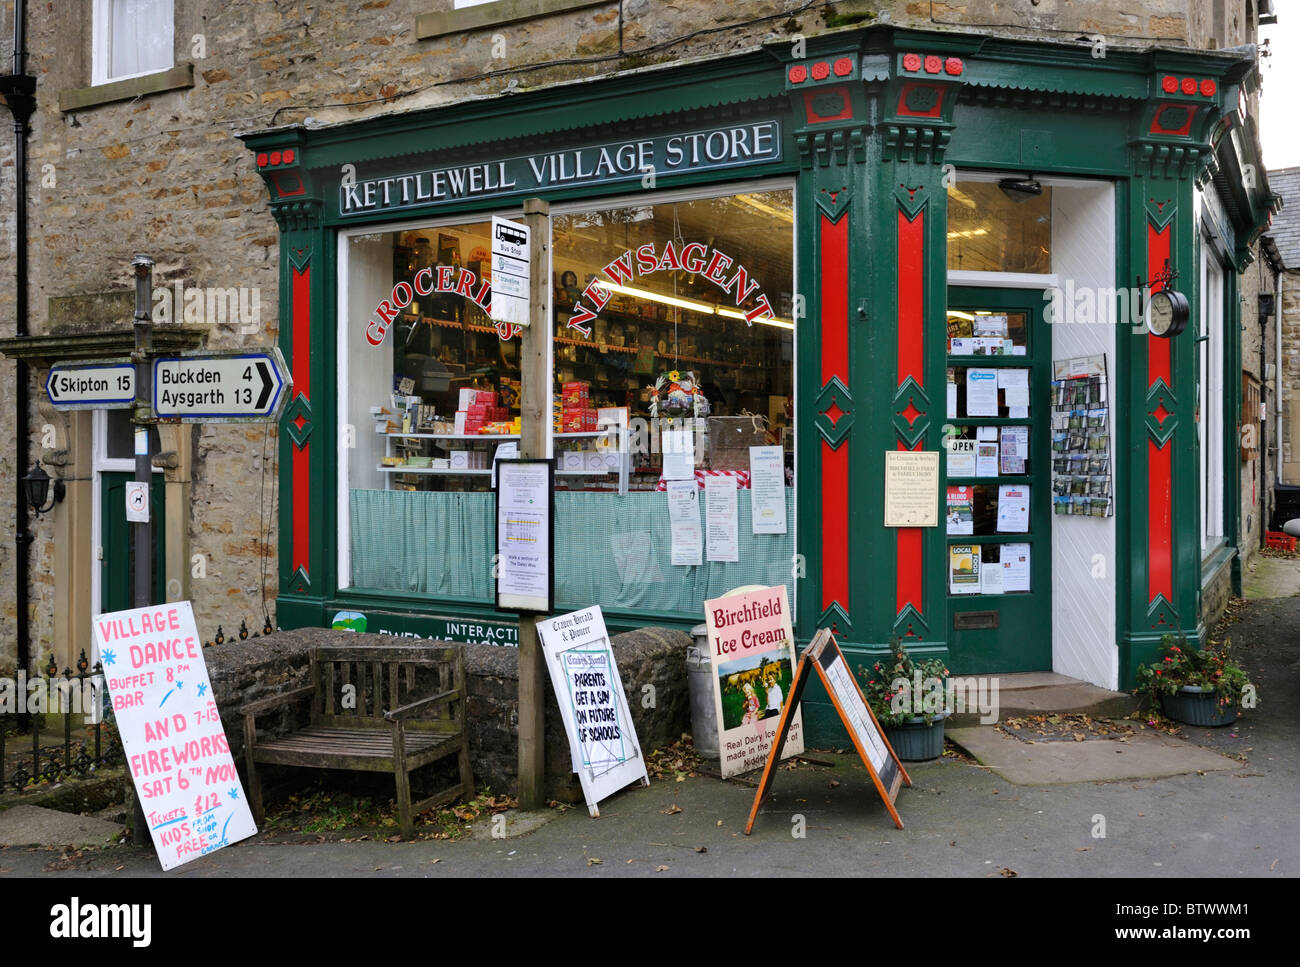 The local shop in the village of Kettlewell, Wharfedale, Yorkshire Dales National Park, England. Stock Photo